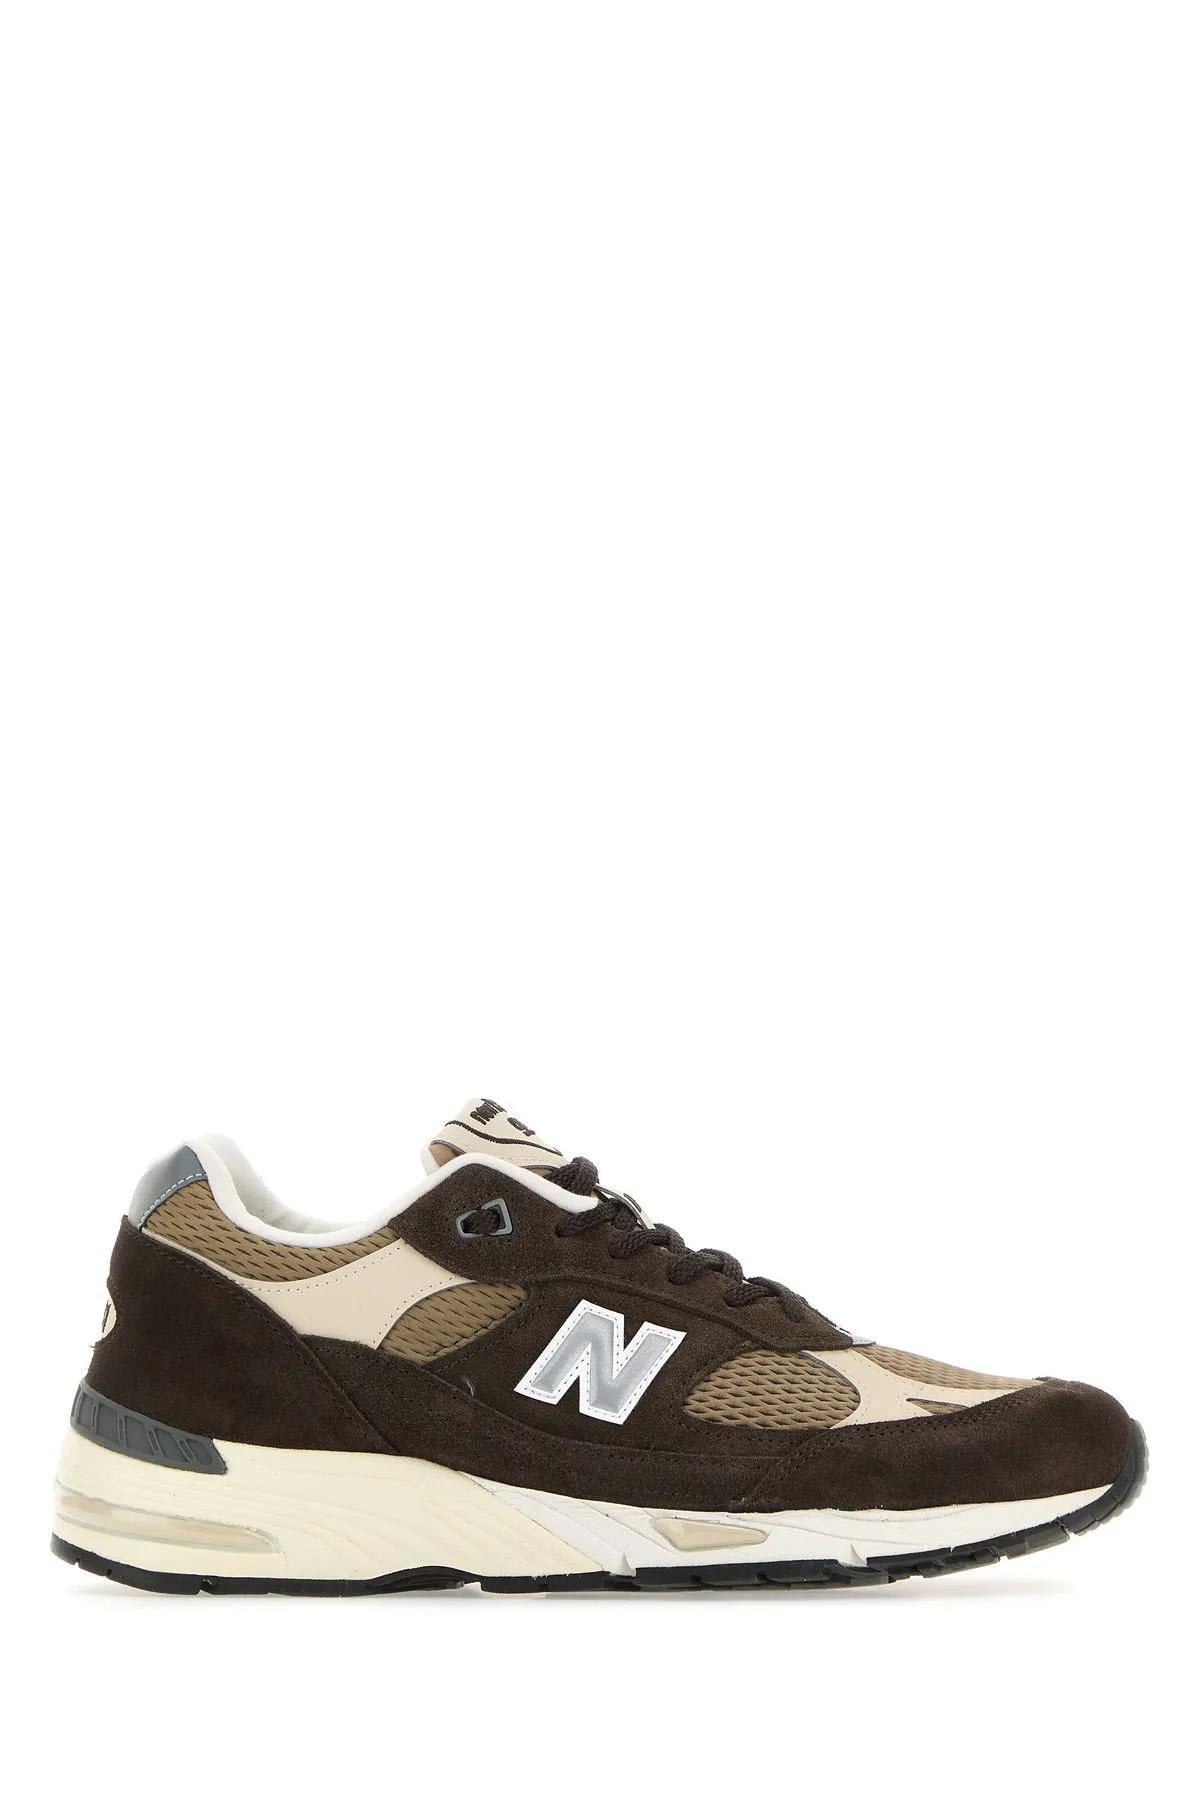 Brown Suede And Mesh 991v1 Sneakers